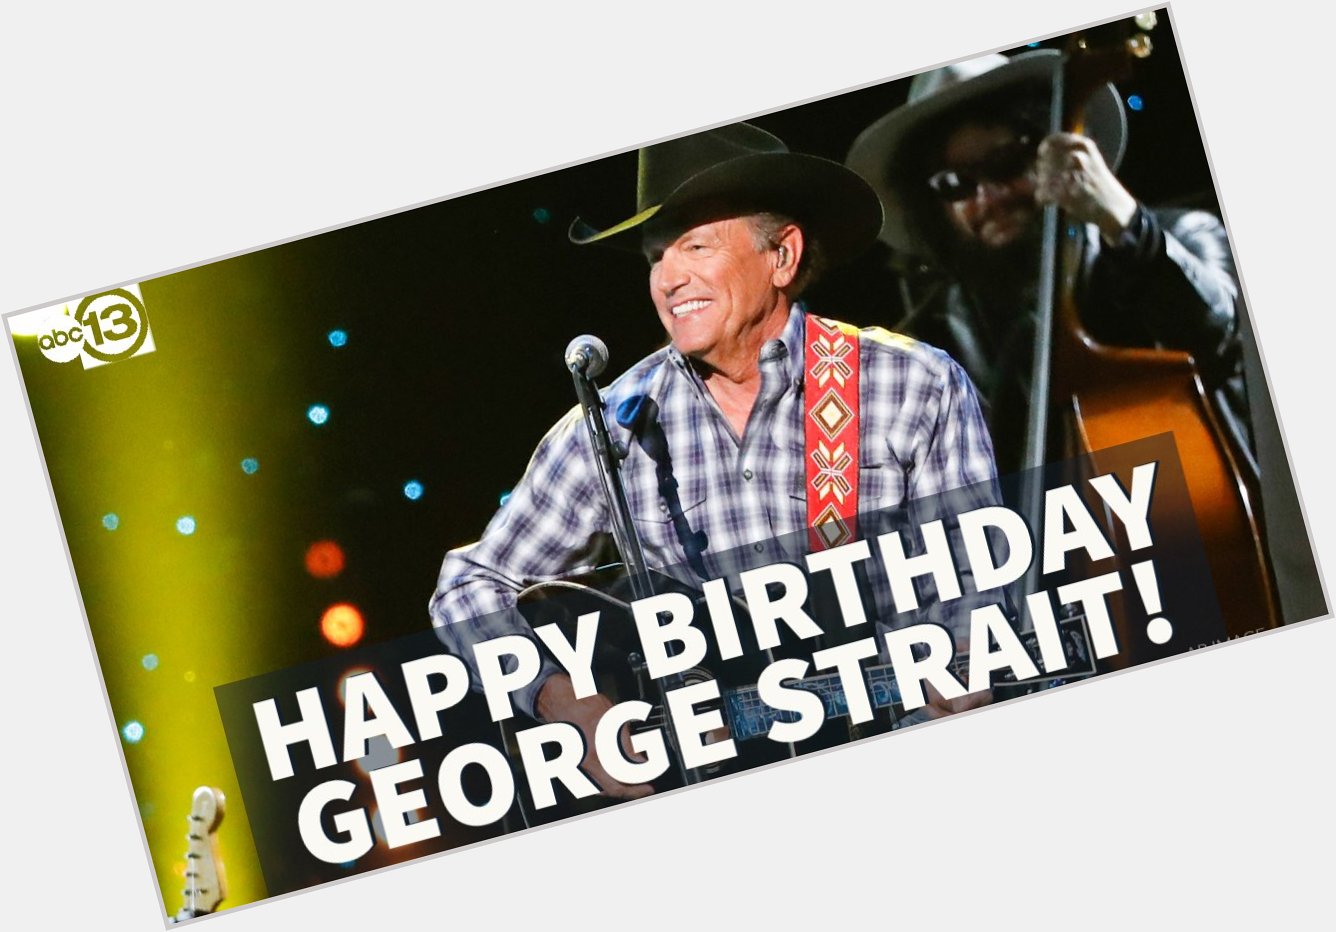 Wishing the King of Country a HAPPY BIRTHDAY! What s your favorite George Strait song? 